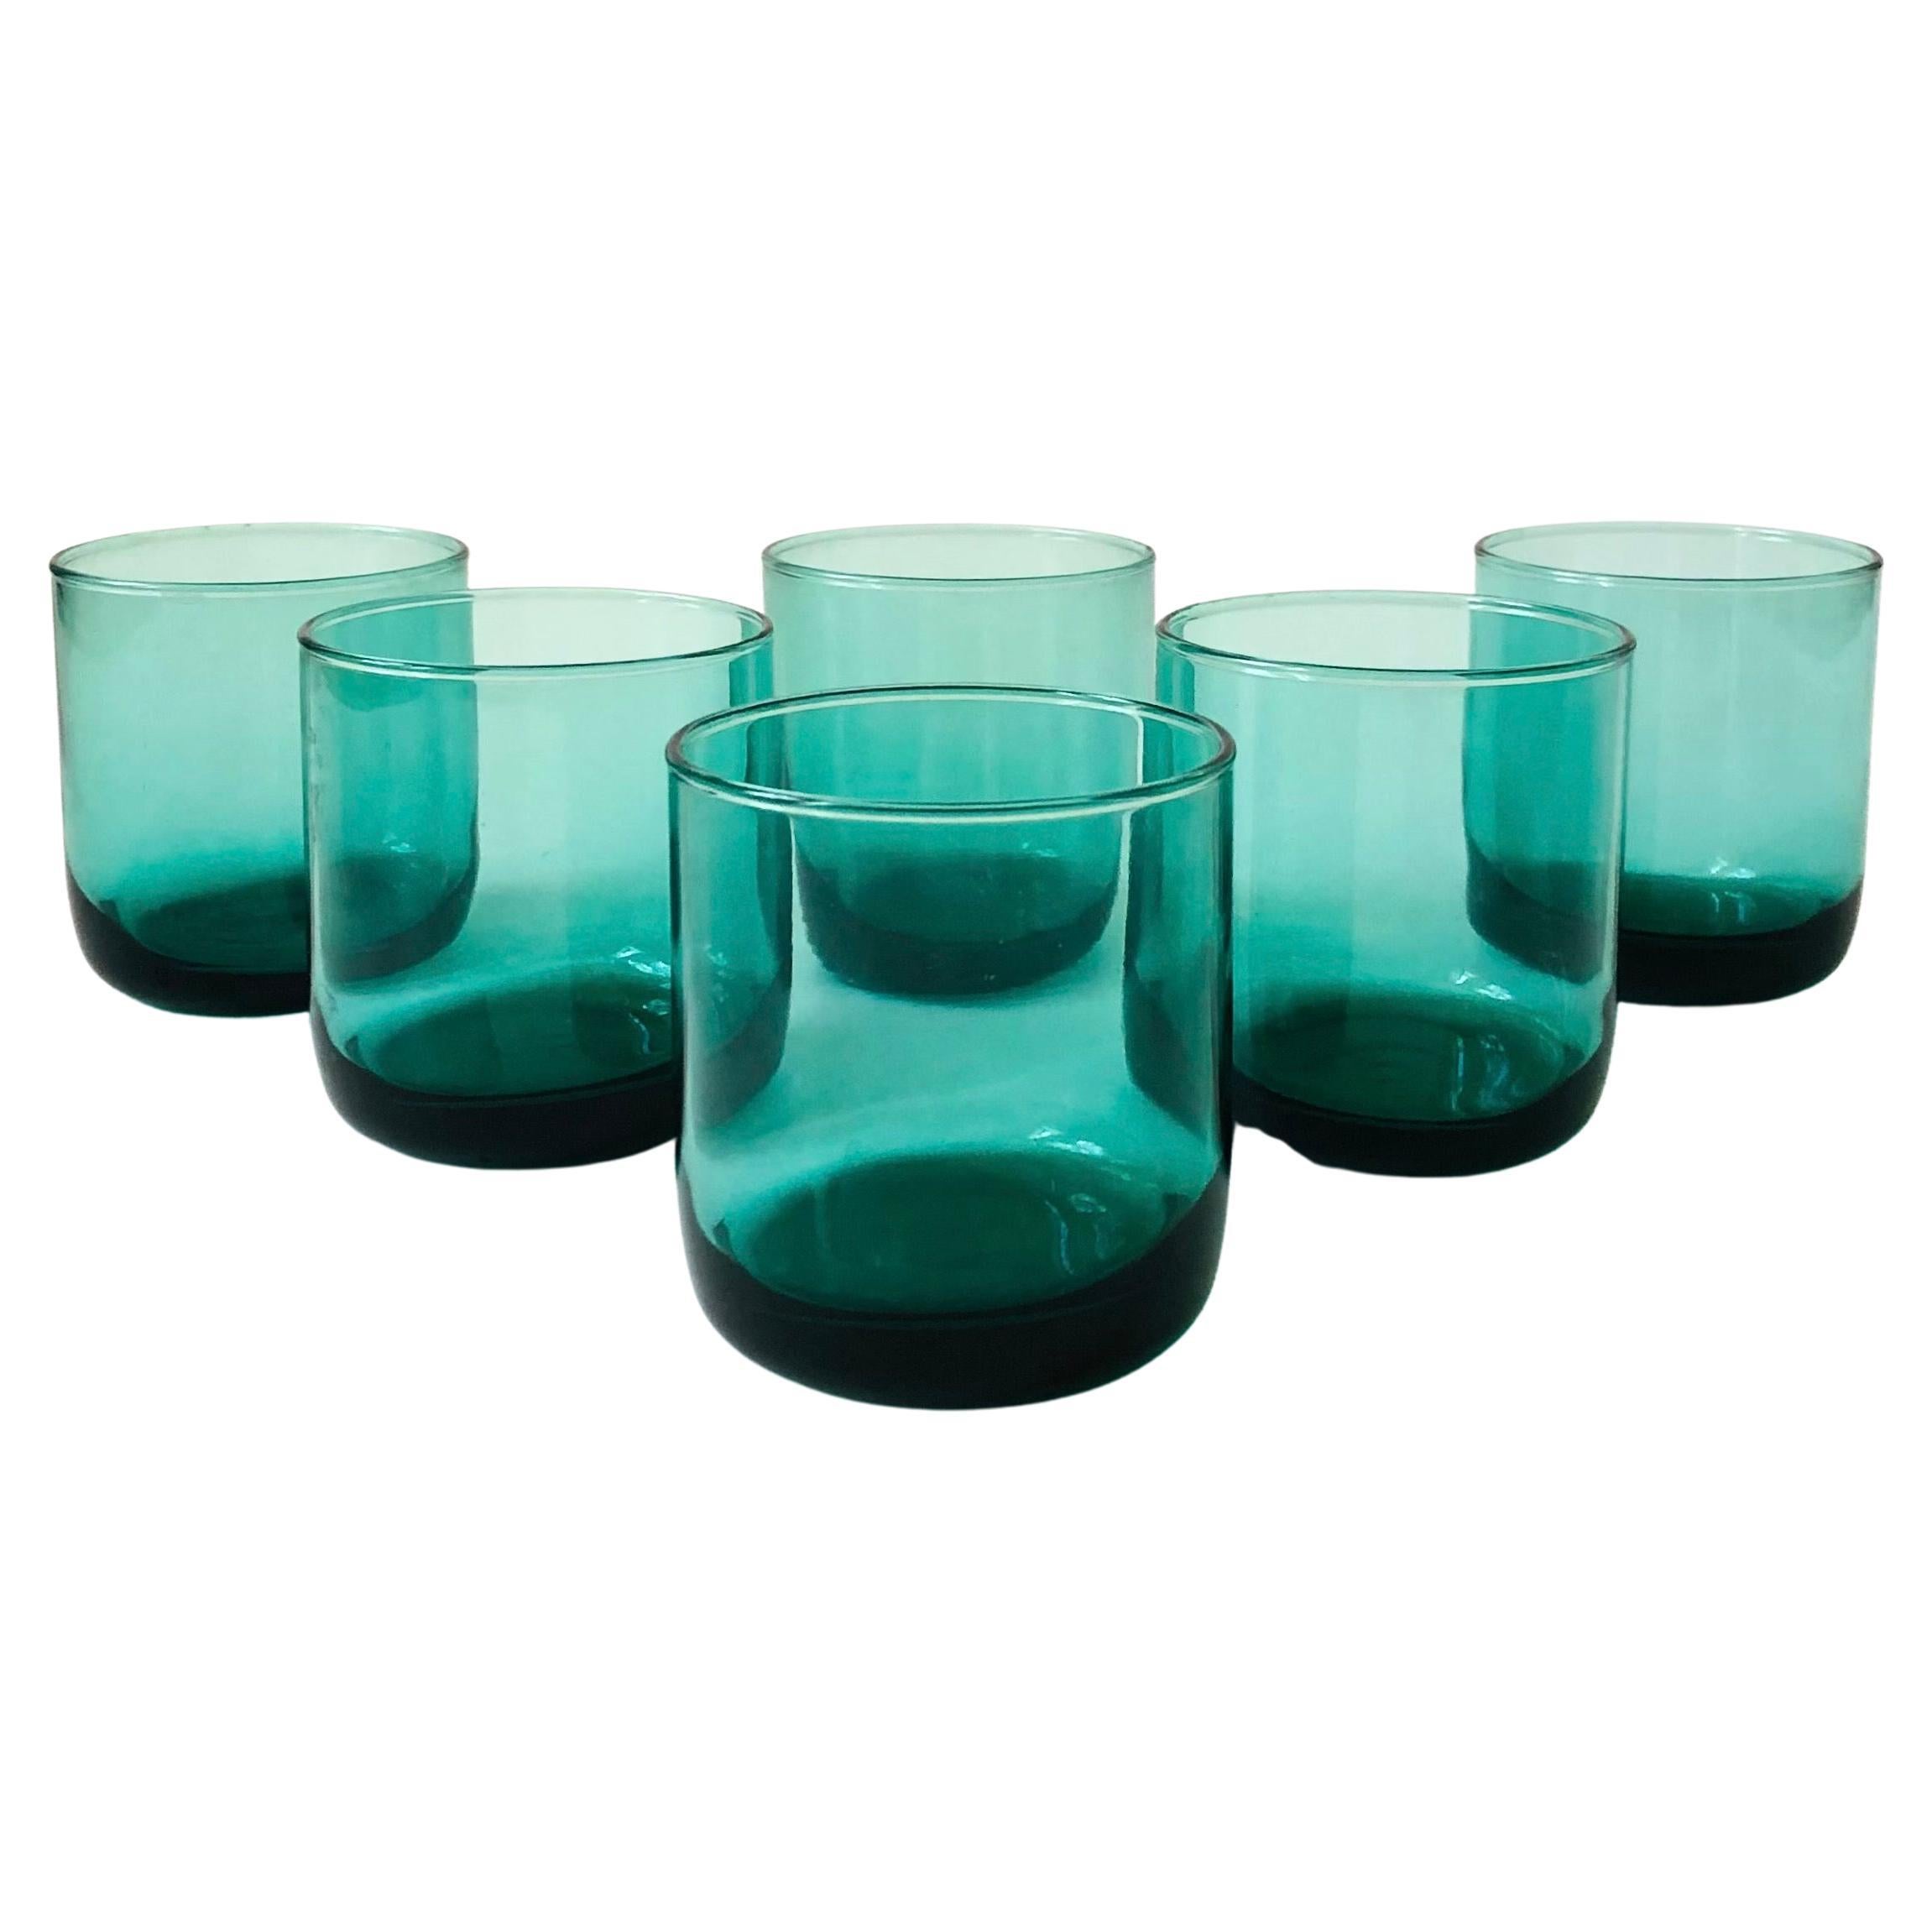 Teal Lowball Tumblers - Set of 6